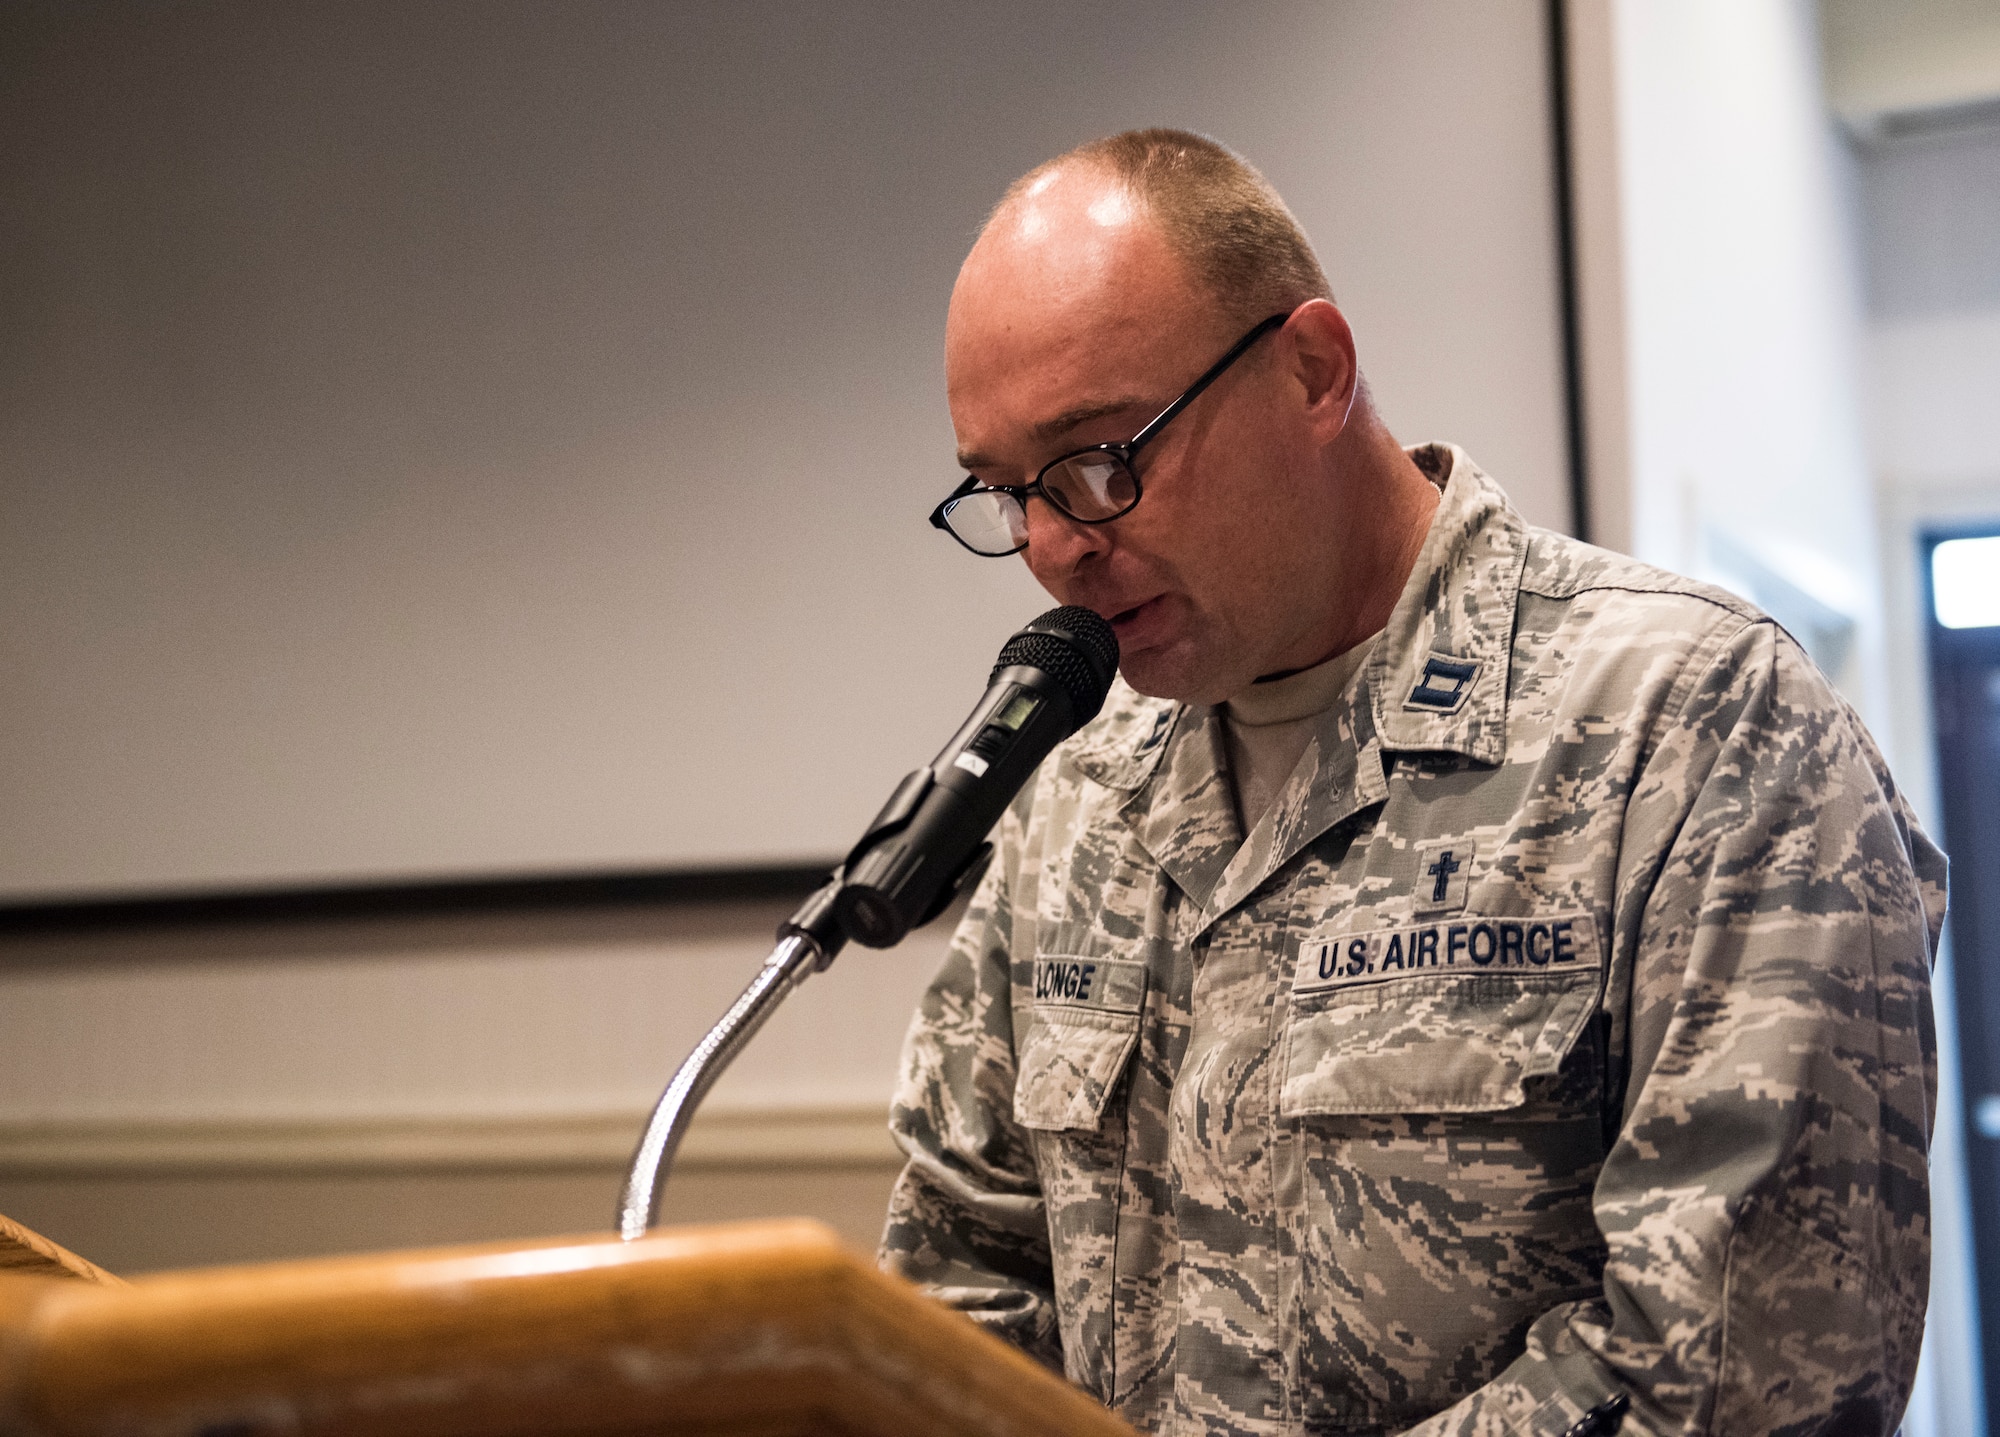 U.S. Air Force Capt. James Longe, 8th Fighter Wing chaplain, gives an invocation during a prisoners of war and missing in action memorial ceremony at Kunsan Air Base, Republic of Korea, Sept. 20, 2019. Leaders from the Wolf Pack and Republic of Korea Air Force’s 38th Fighter Group came together to honor those who are still lost but not forgotten. (U.S. Air Force photo by Senior Airman Stefan Alvarez)